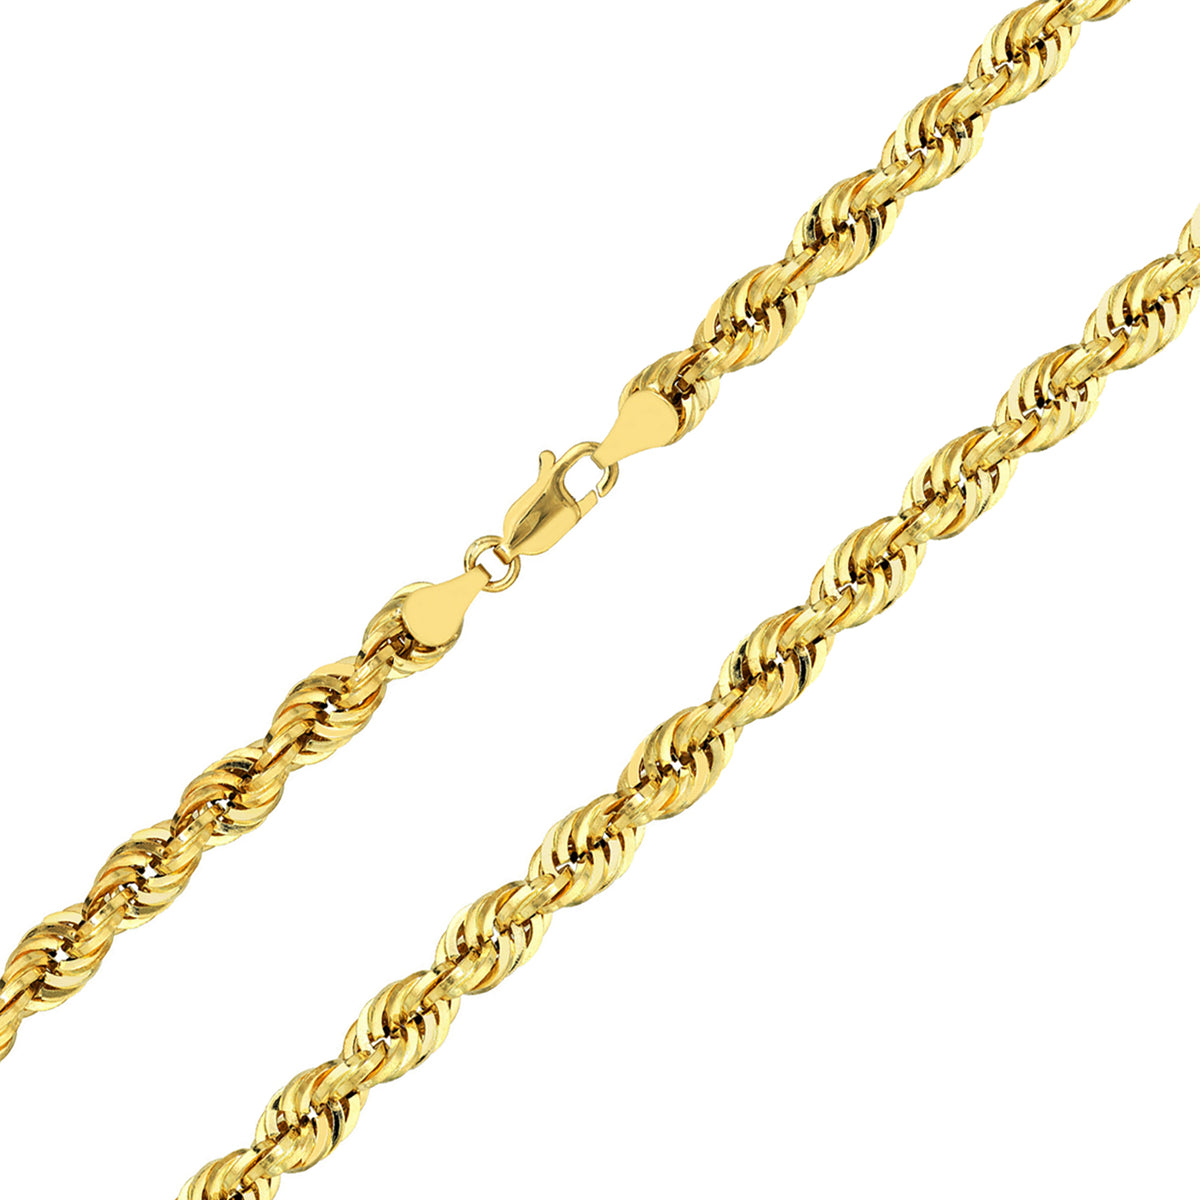 Solid 14k Yellow Gold 7mm Rope Chain Necklace with Lobster Lock - Diamond-Cut